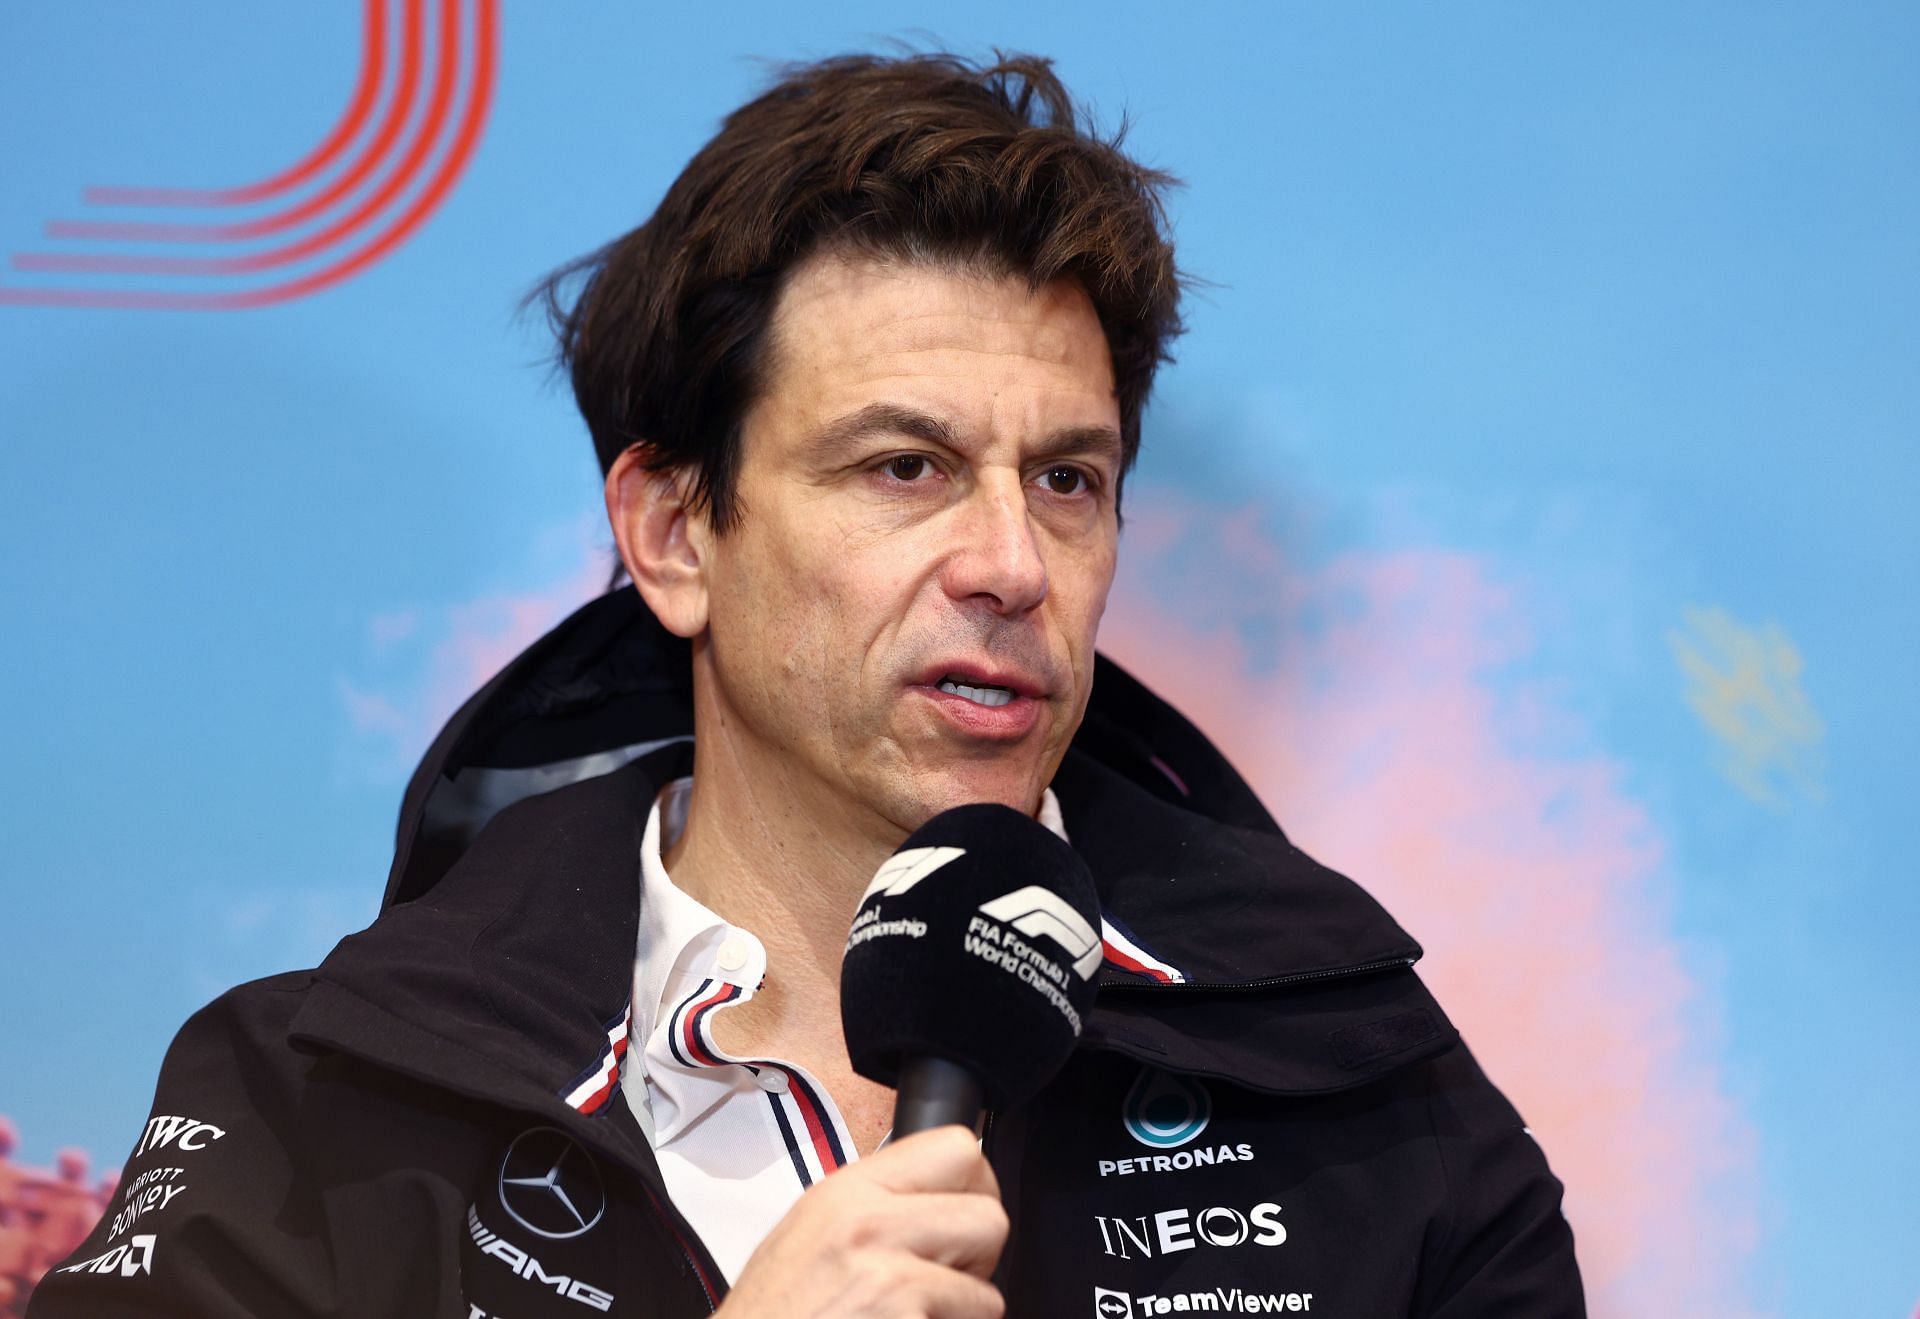 Toto Wolff feels there is still a lot of work that needs to be done by the team